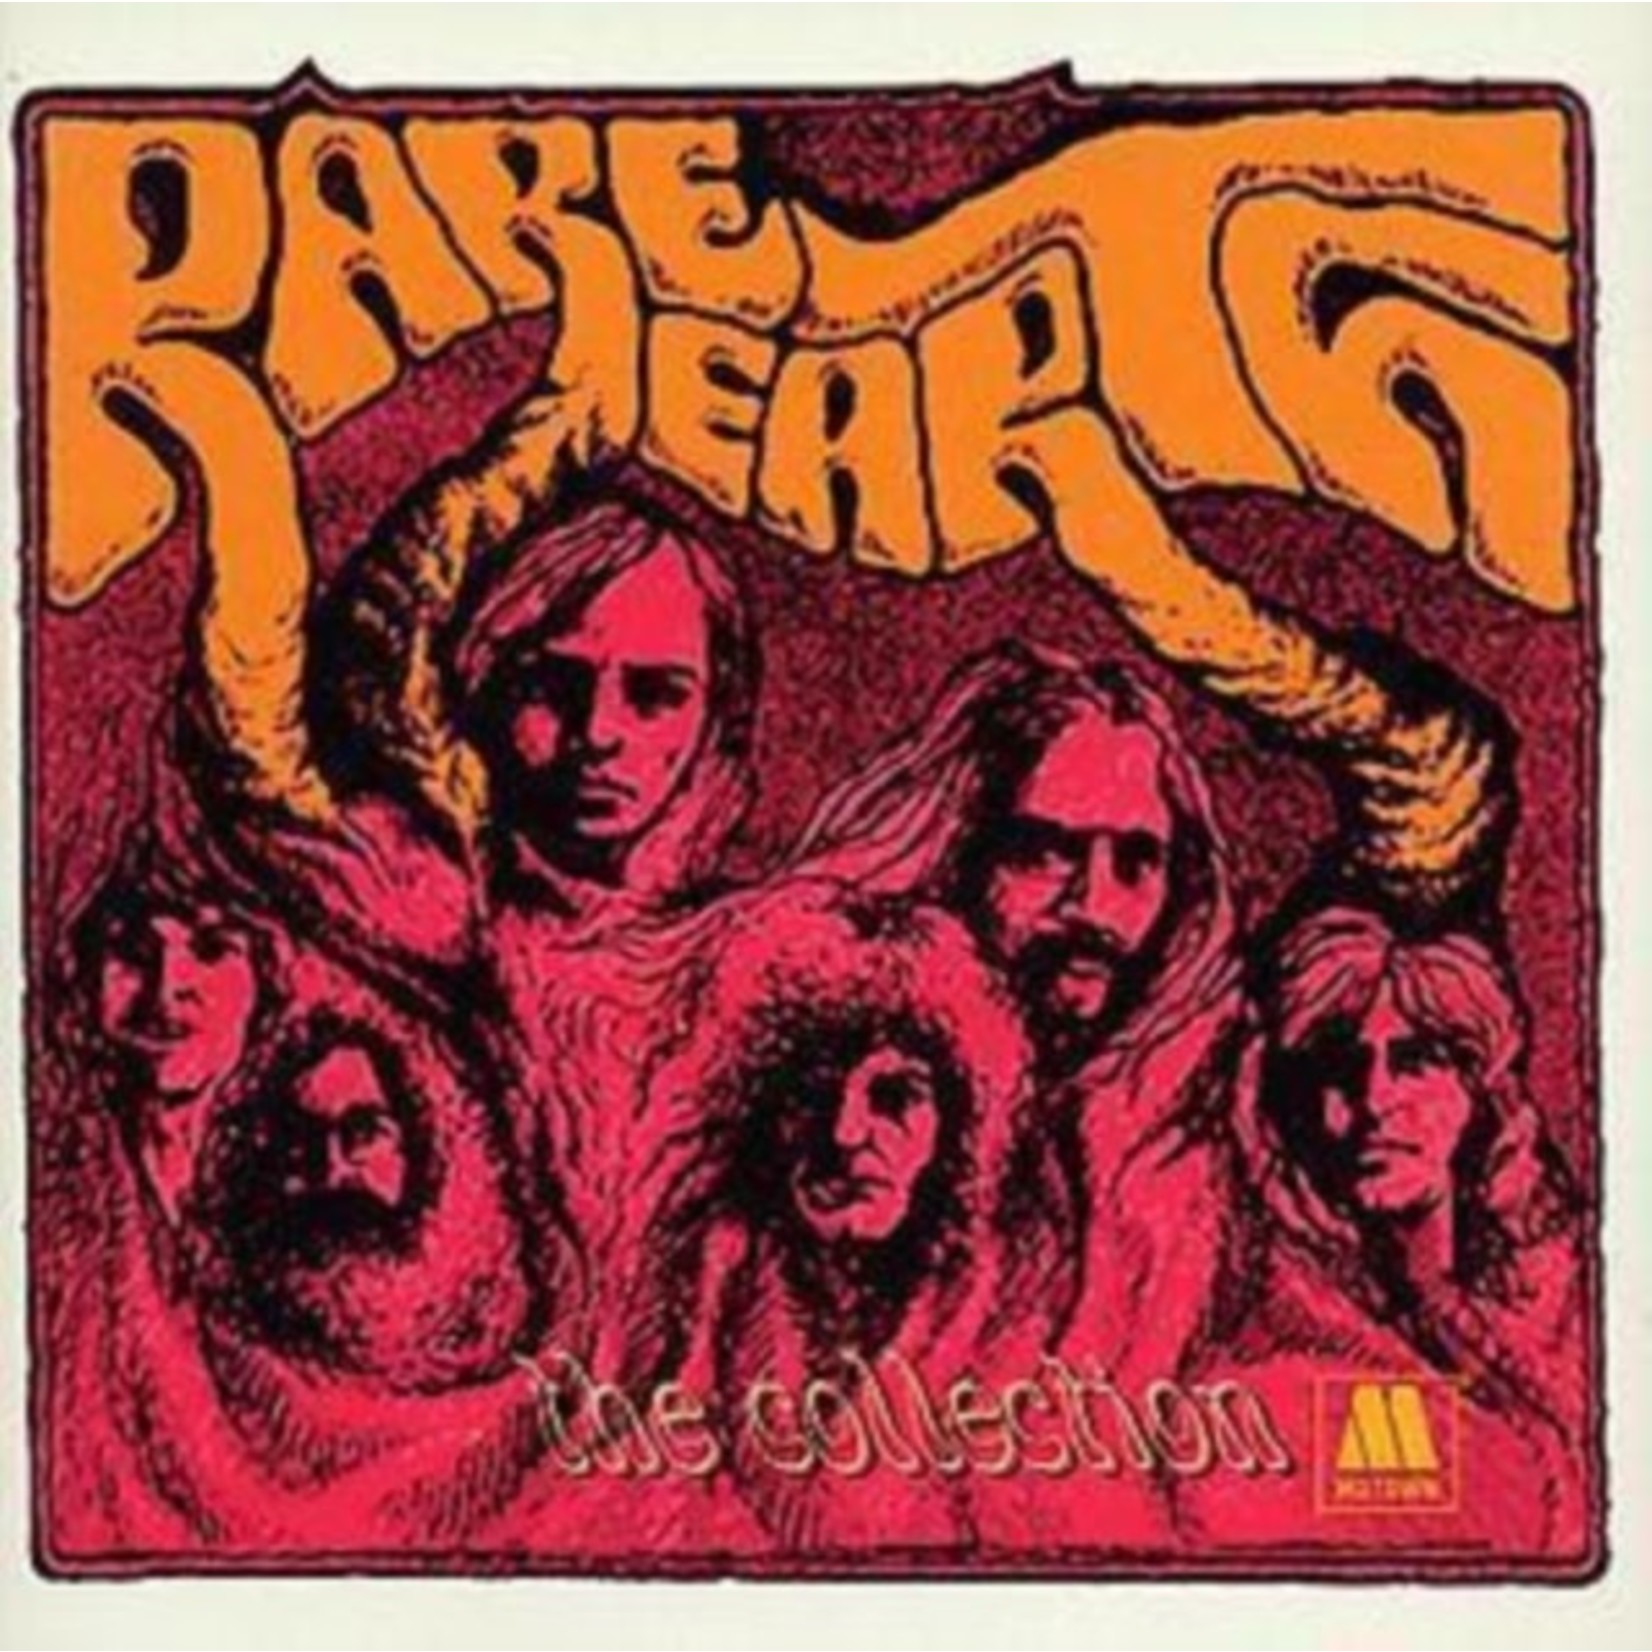 Rare Earth - The Collection [CD]